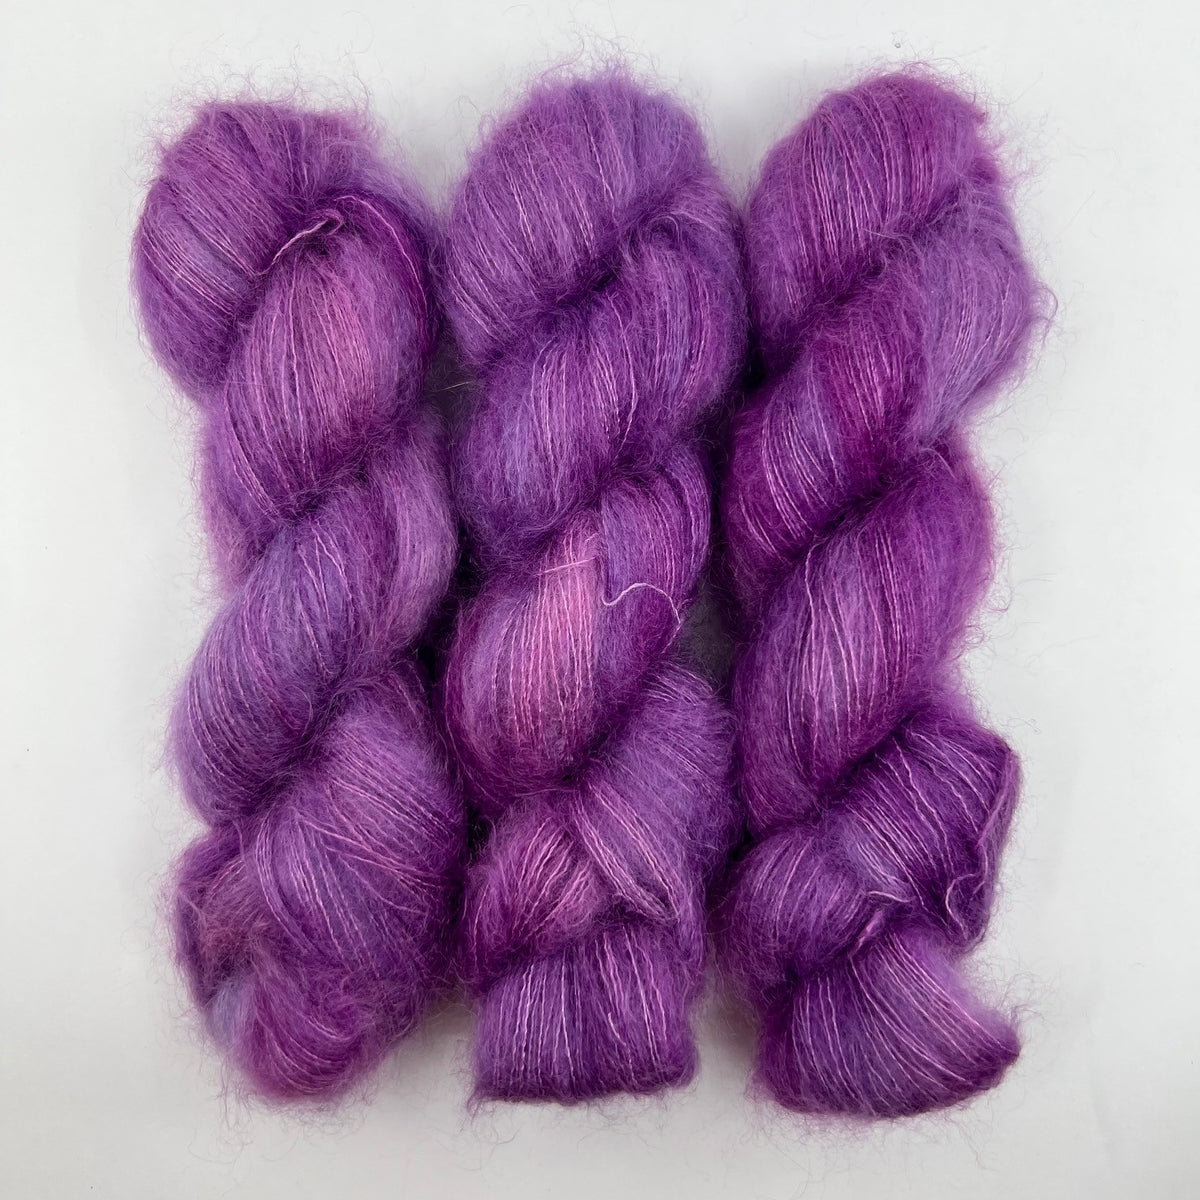 African Violet - Delicacy Lace - Dyed Stock